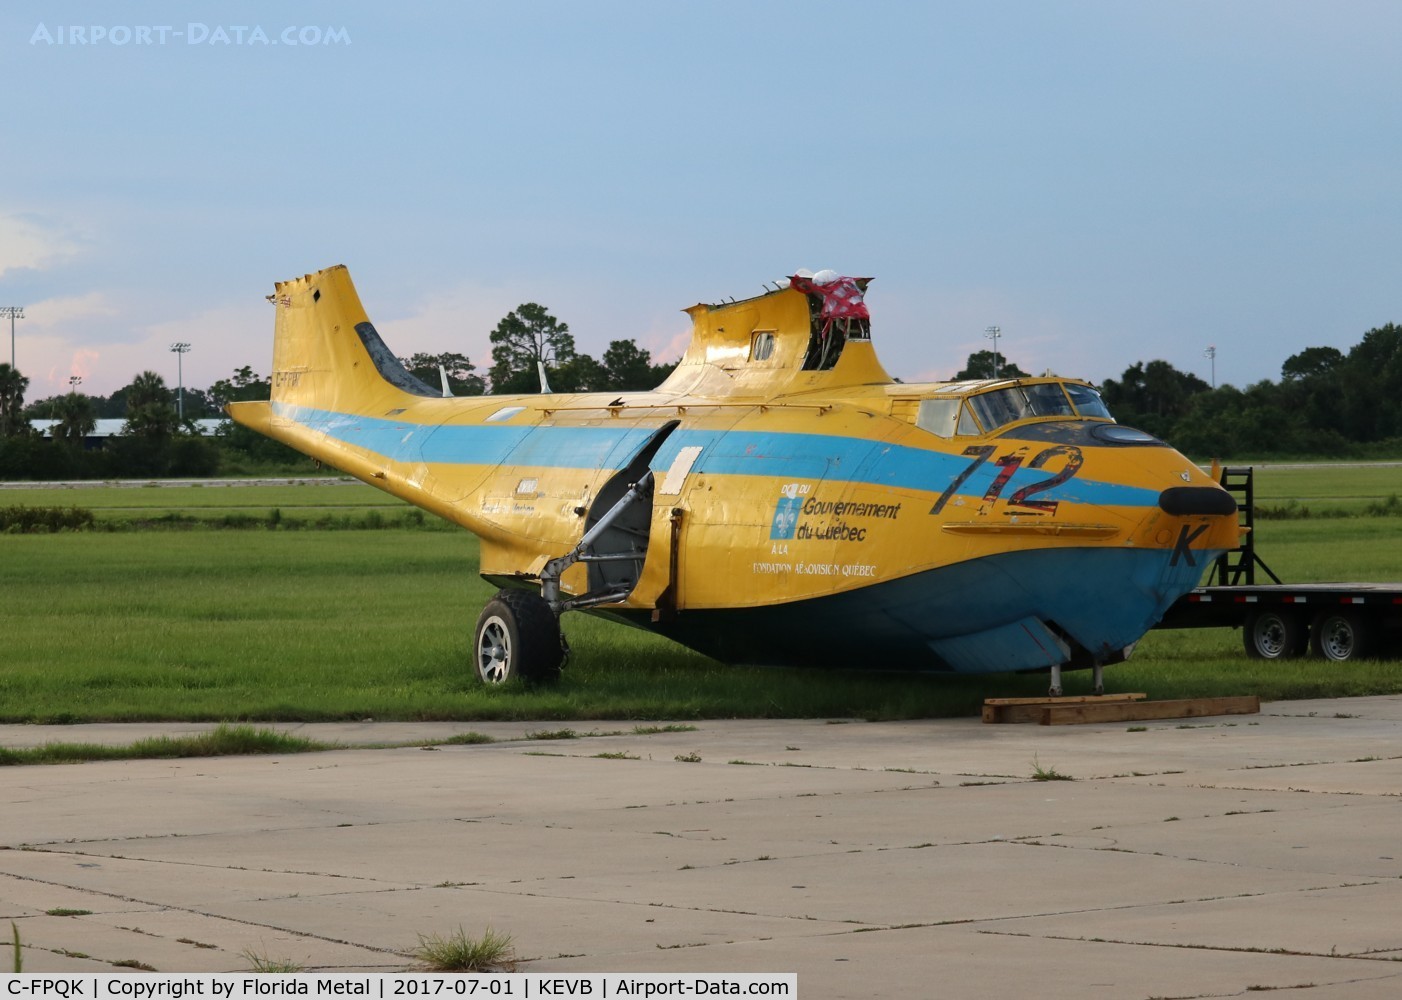 C-FPQK, 1942 Consolidated (Canadian Vickers) PBY-5A Canso A (28) C/N CV-264, PBY-5A